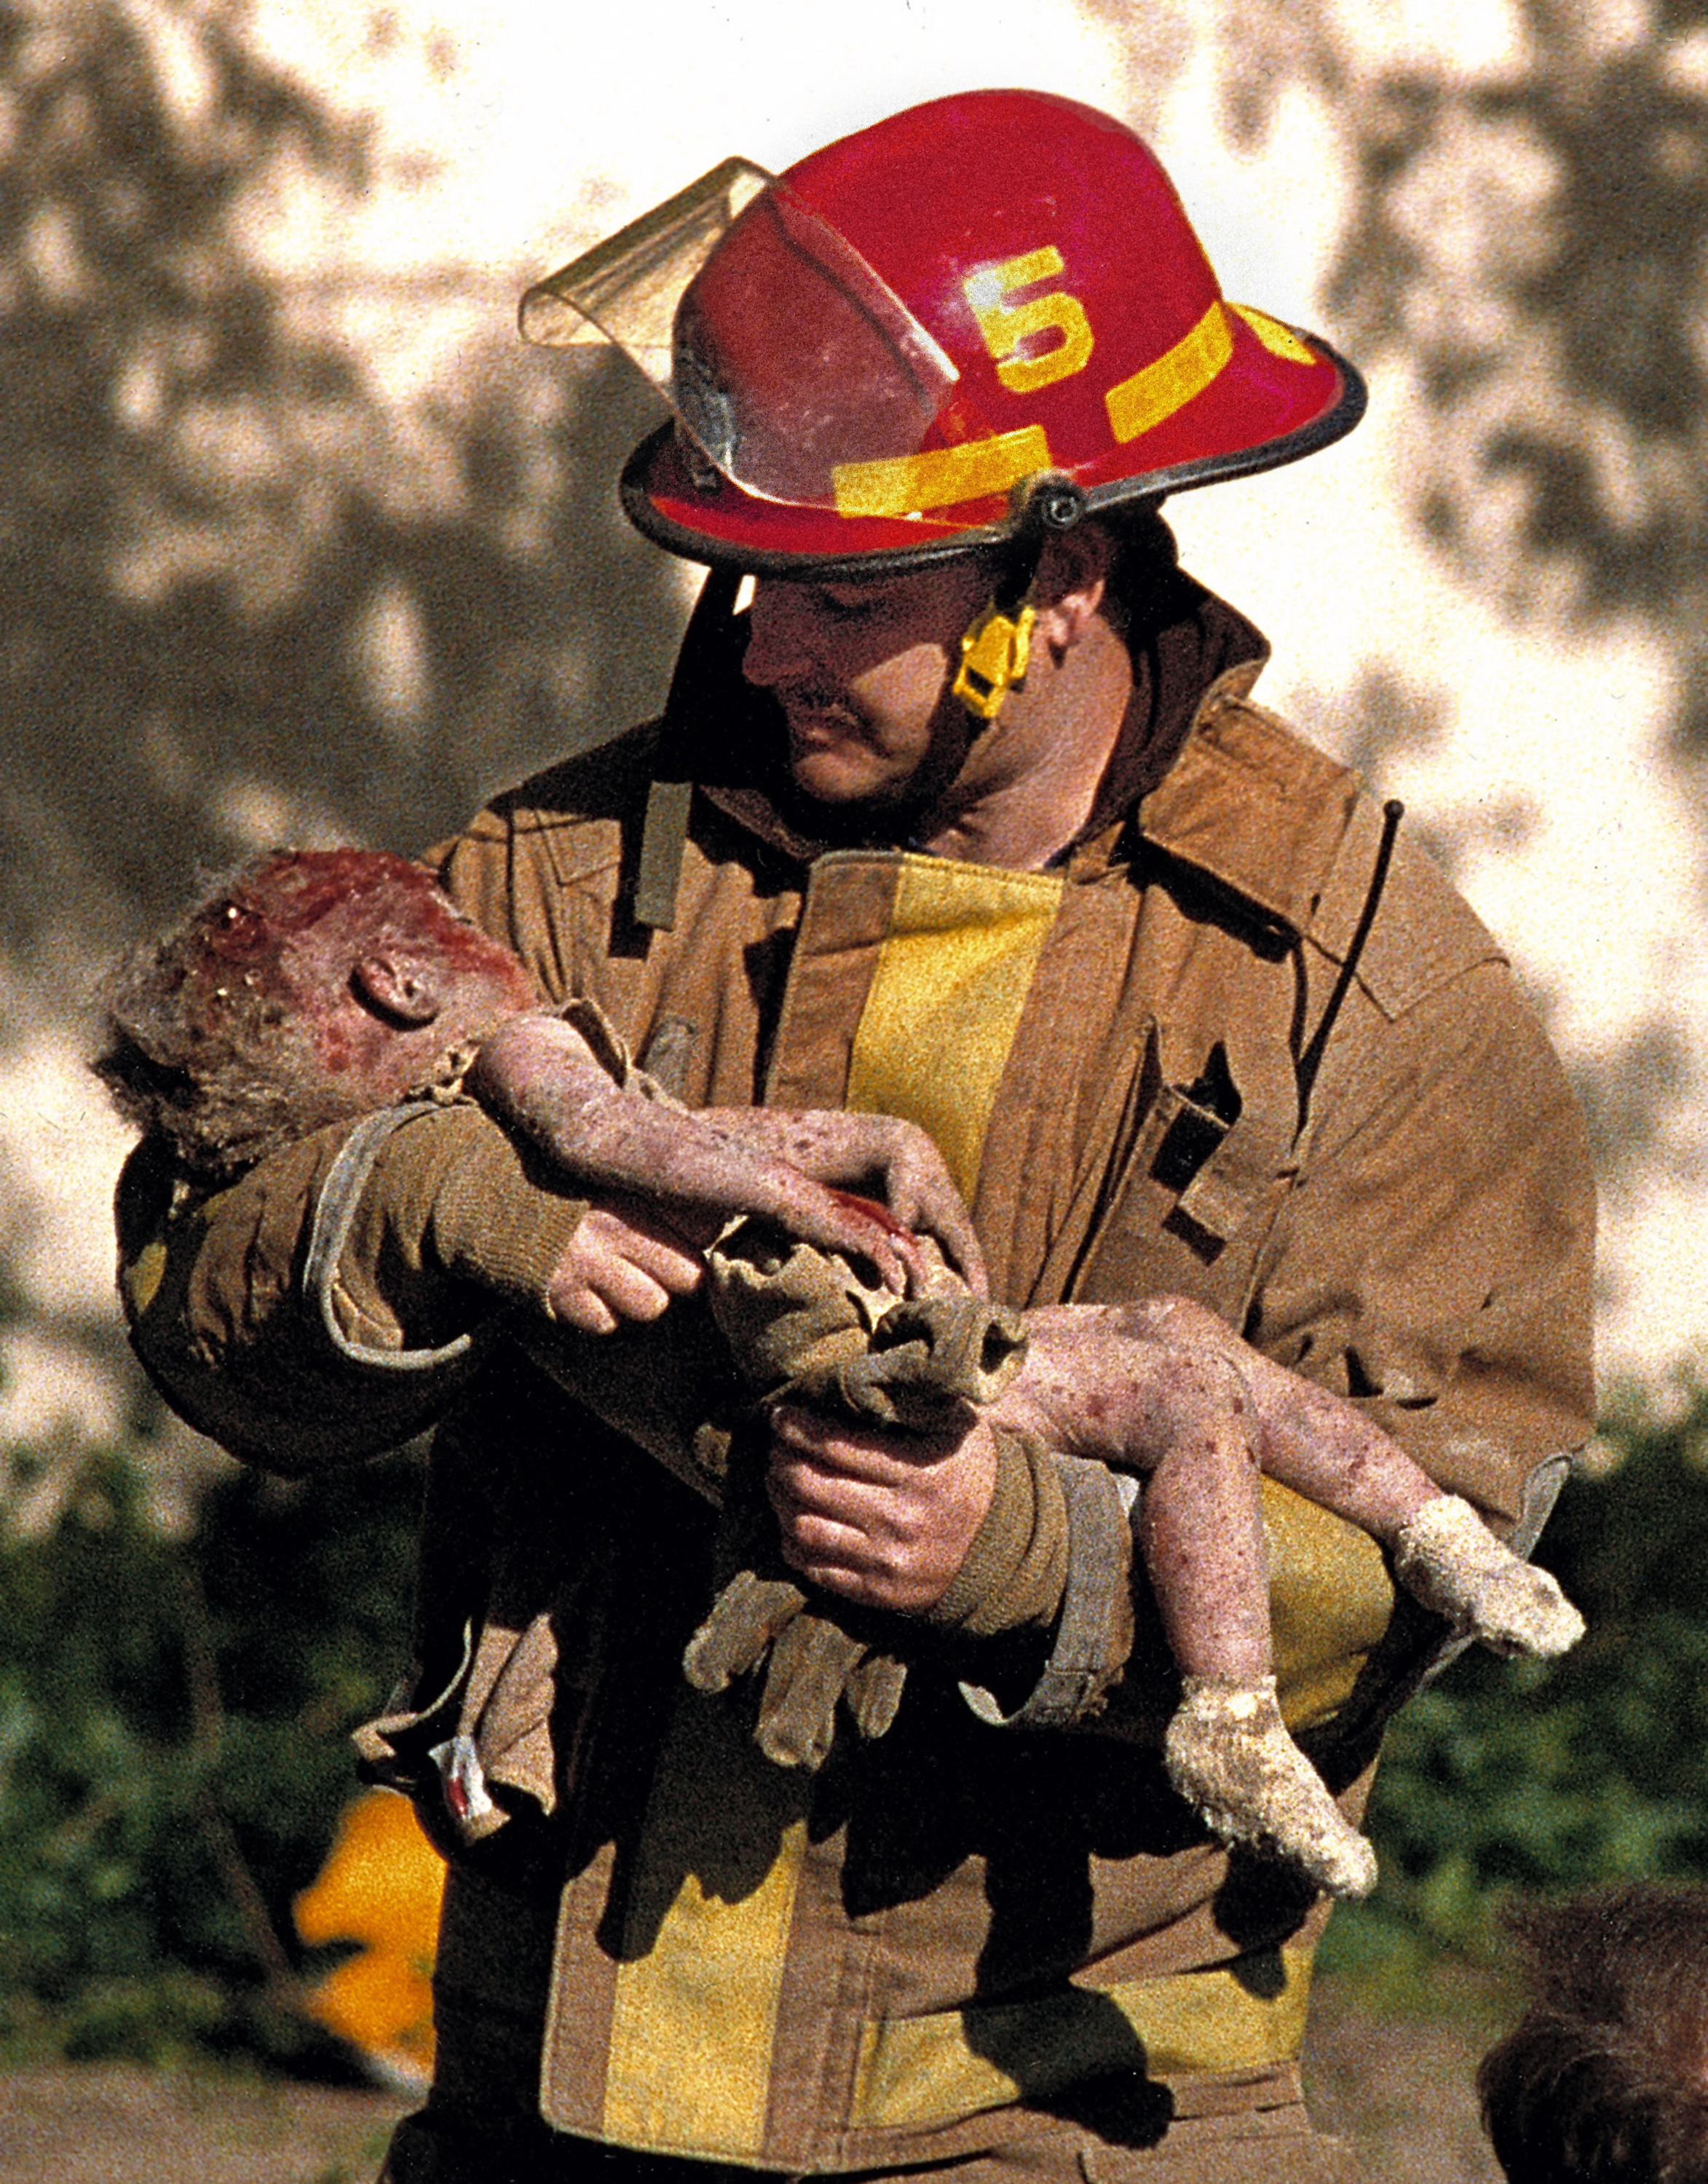 Oklahoma City fire Capt. Chris Fields carries 1-year-old Baylee Almon, injured in the April, 19, 1995 bombing of the Alfred Murrah Federal Building in downtown Oklahoma City. The child died of her injuries. (Charles H. Porter IV via AP)